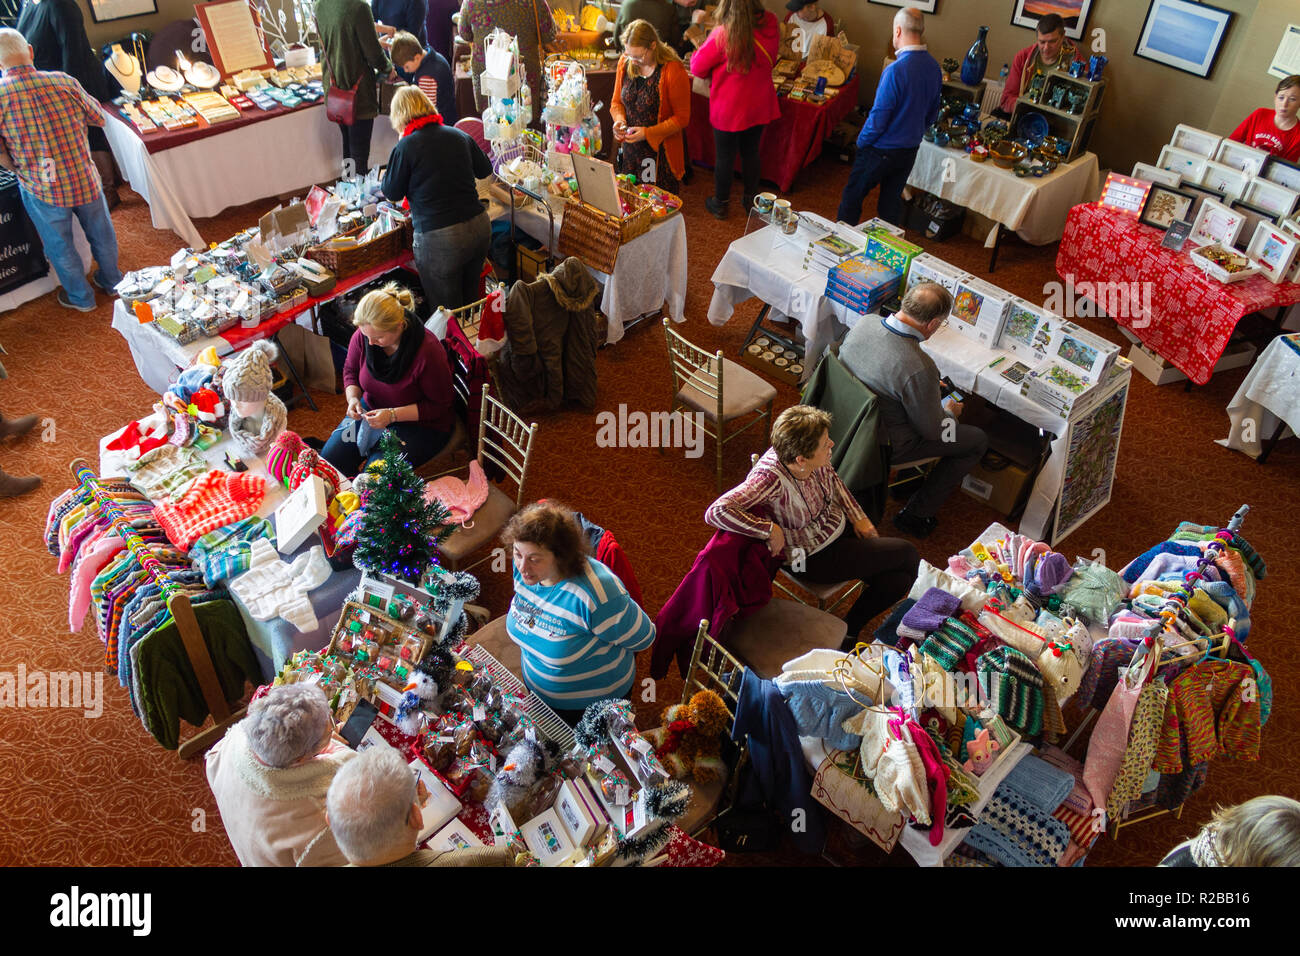 shoppers browsing for gifts and stall holders at an indoor craft market Stock Photo